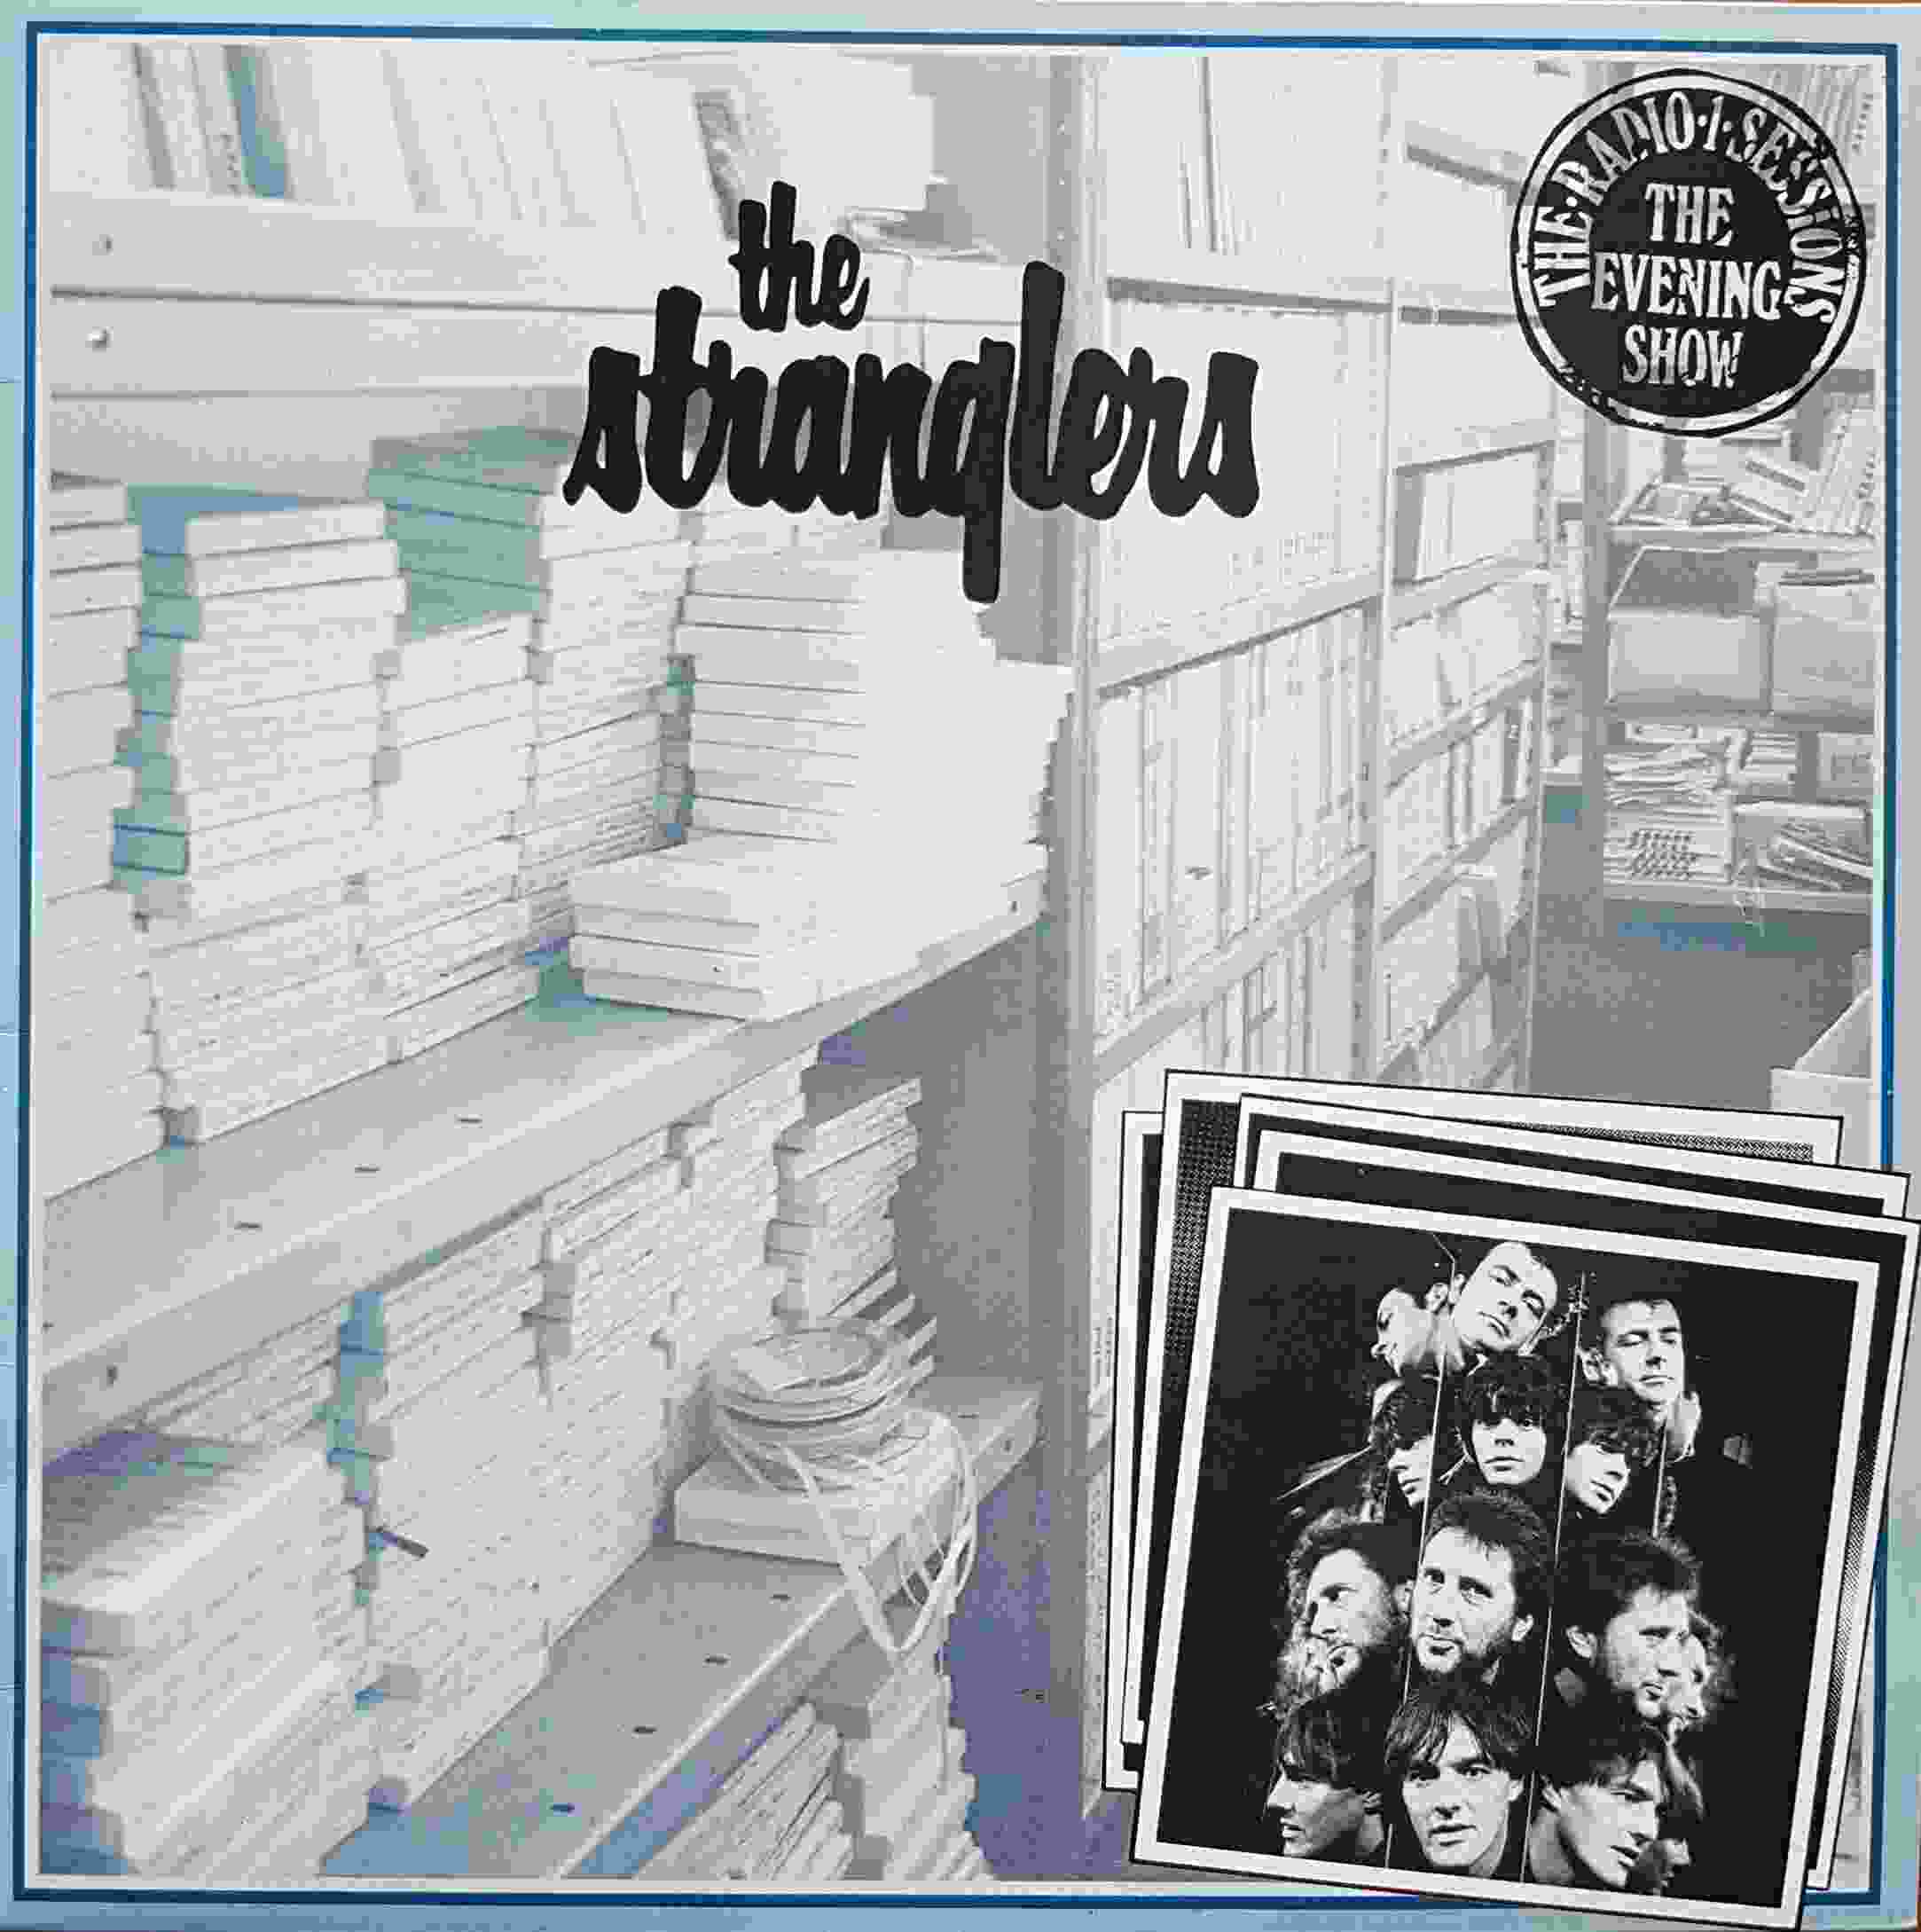 Picture of SFNT 020 The Radio 1 sessions - The evening show by artist The Stranglers  from The Stranglers